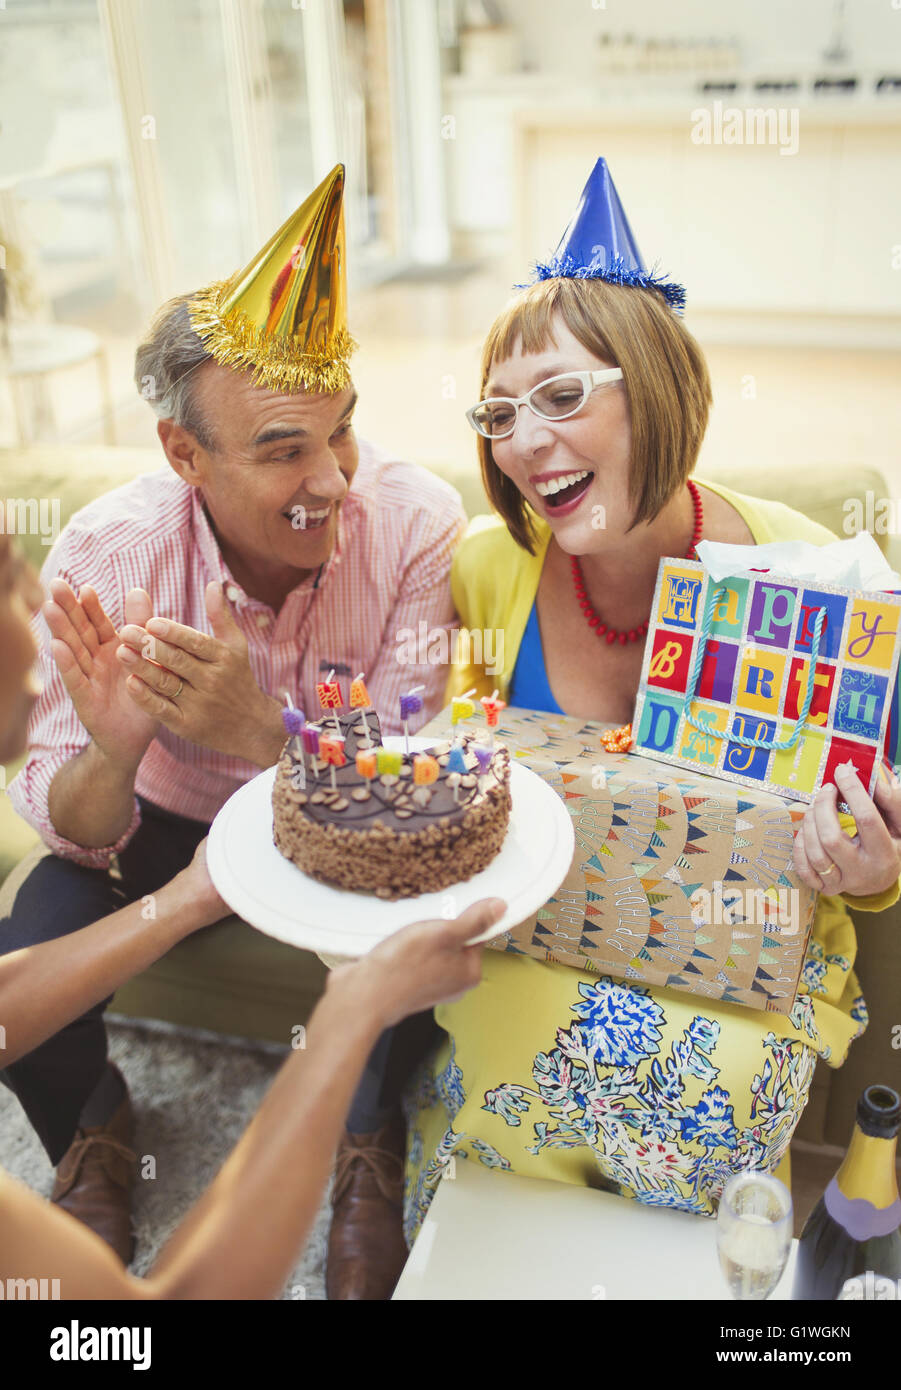 Smiling mature women receiving birthday cake and gifts Stock Photo